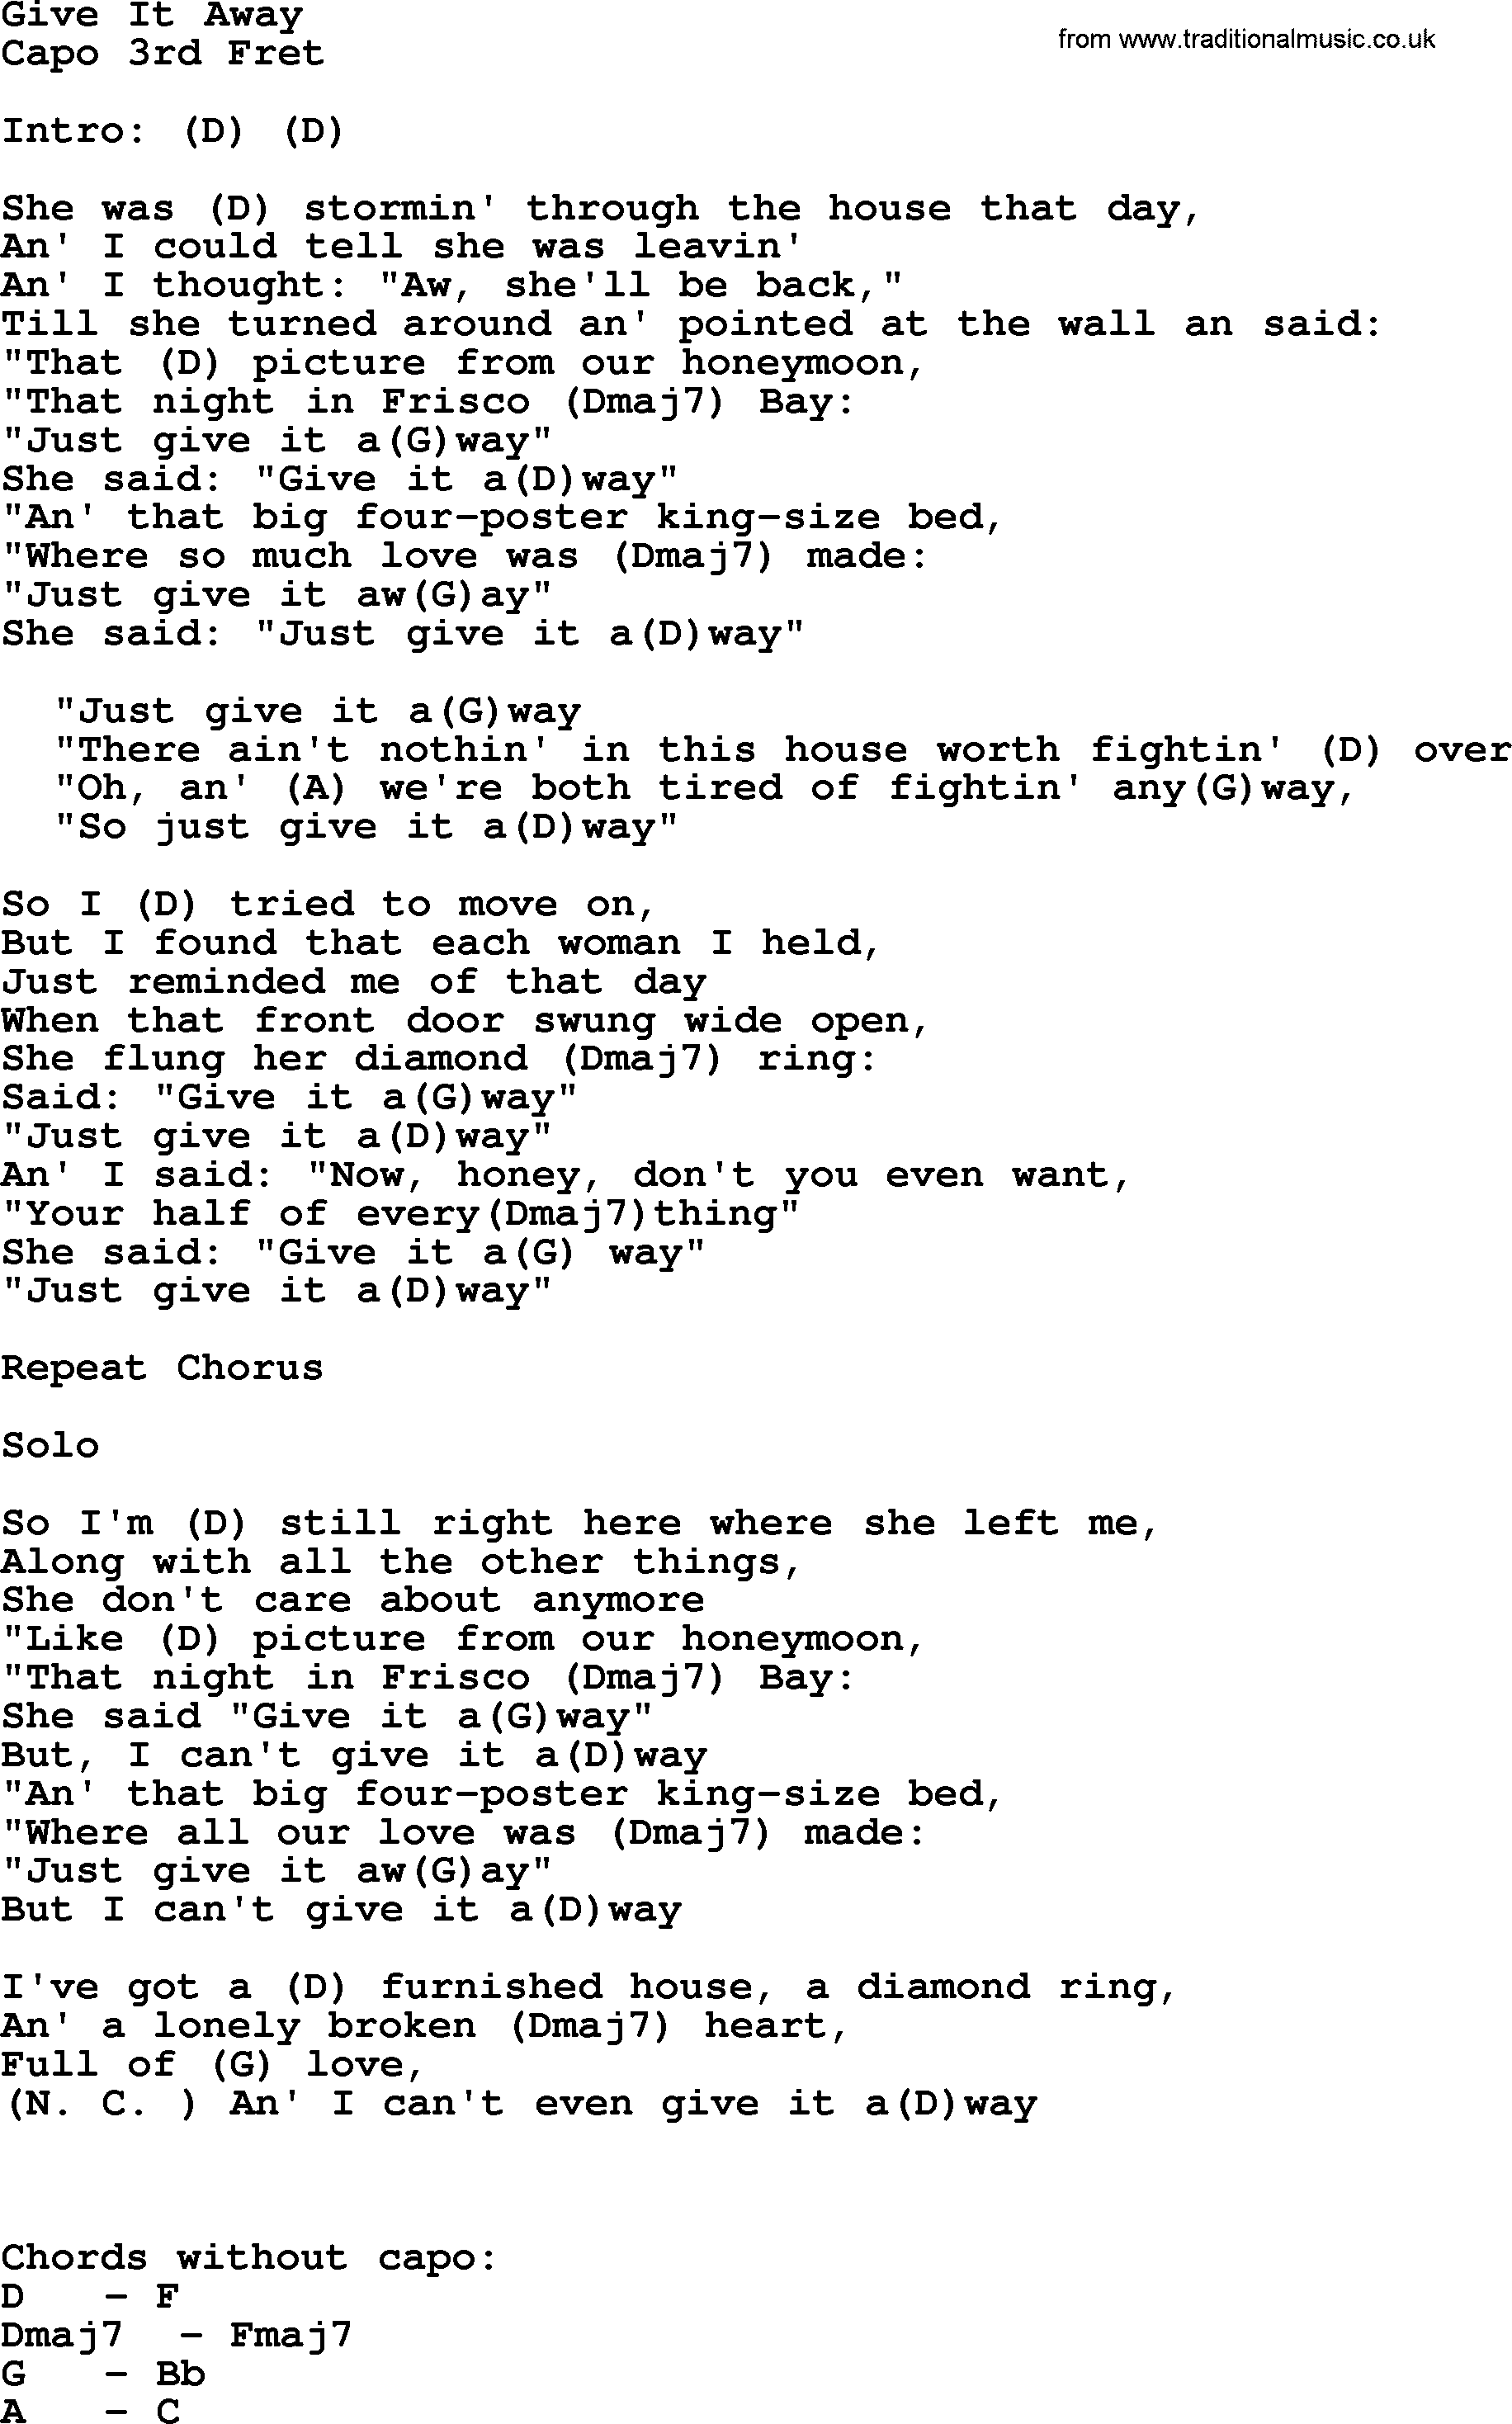 George Strait song: Give It Away, lyrics and chords